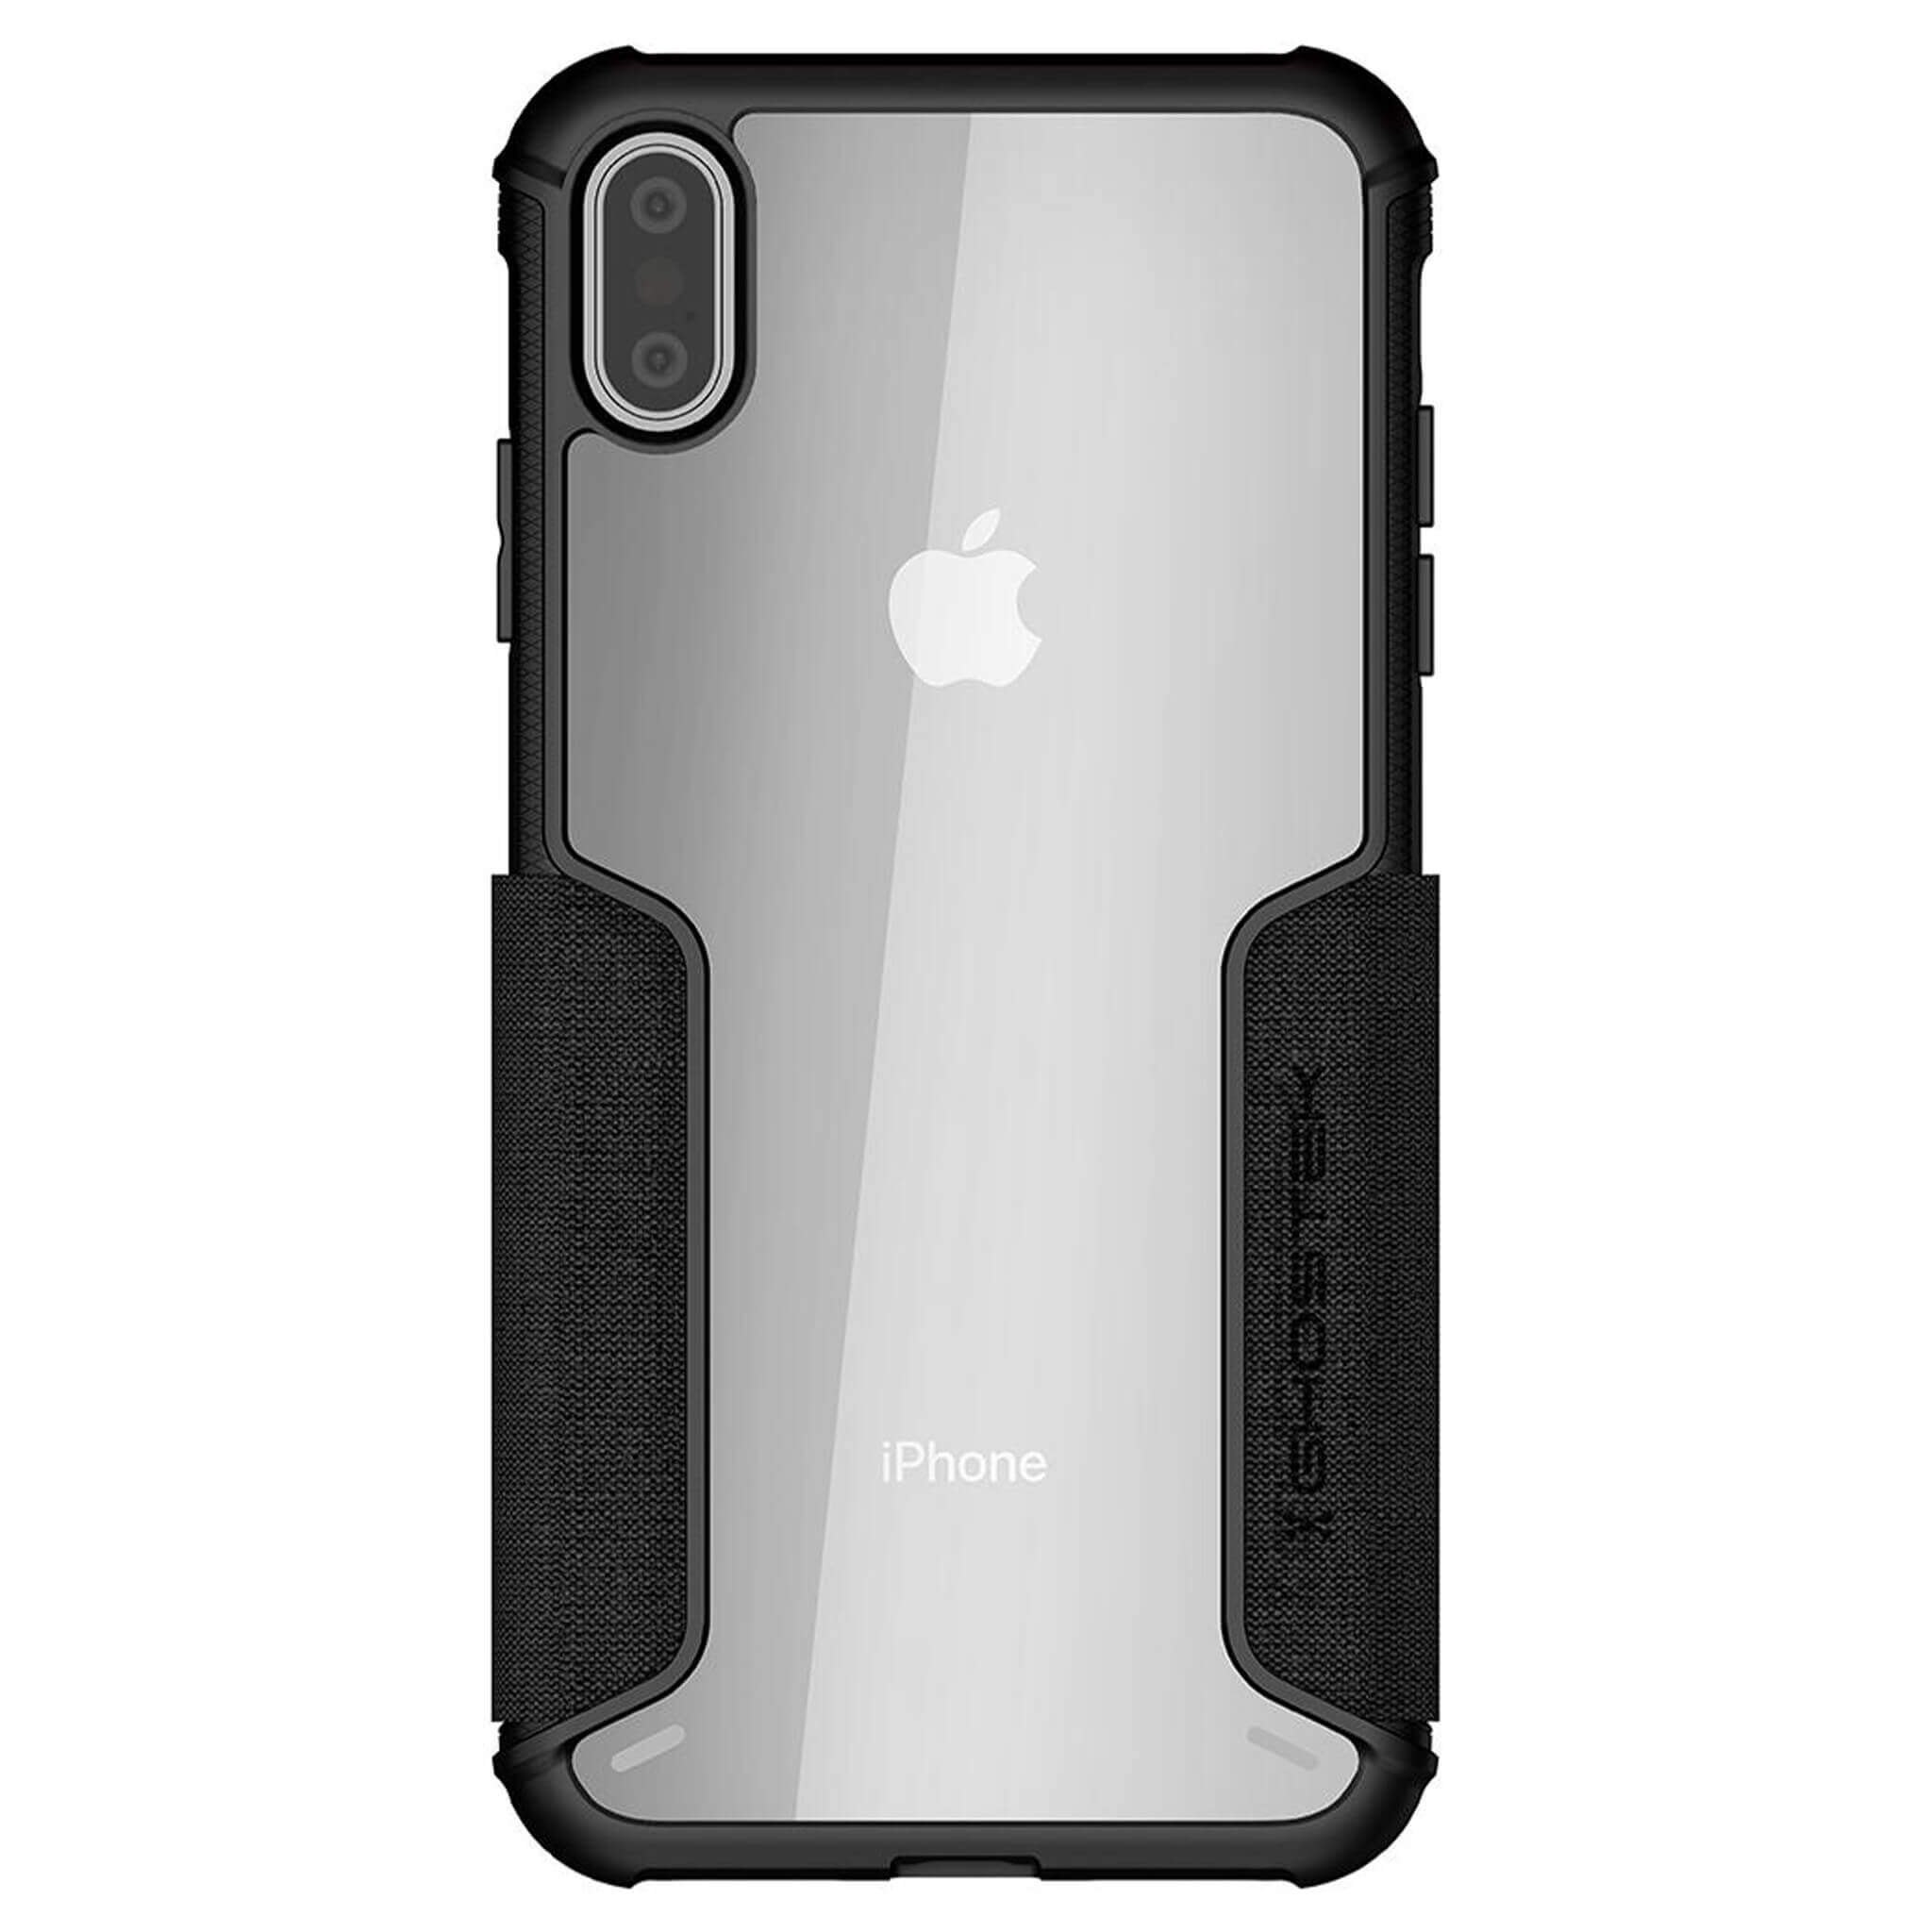 EXEC WALLET Cases for iPhone X / XR / XS / XS Max